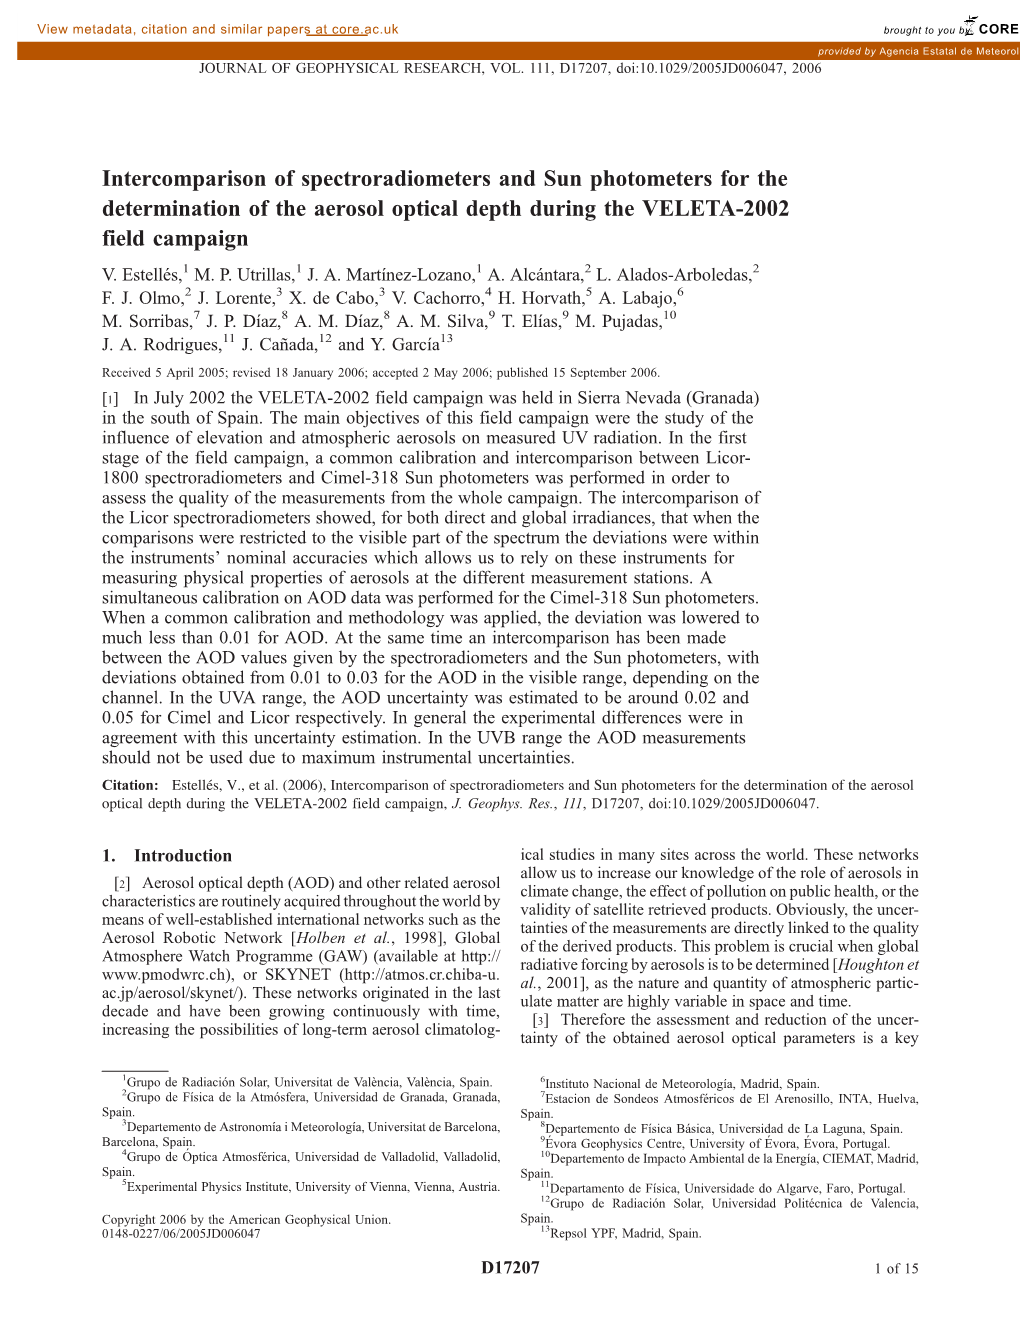 Intercomparison of Spectroradiometers and Sun Photometers for the Determination of the Aerosol Optical Depth During the VELETA-2002 Field Campaign V